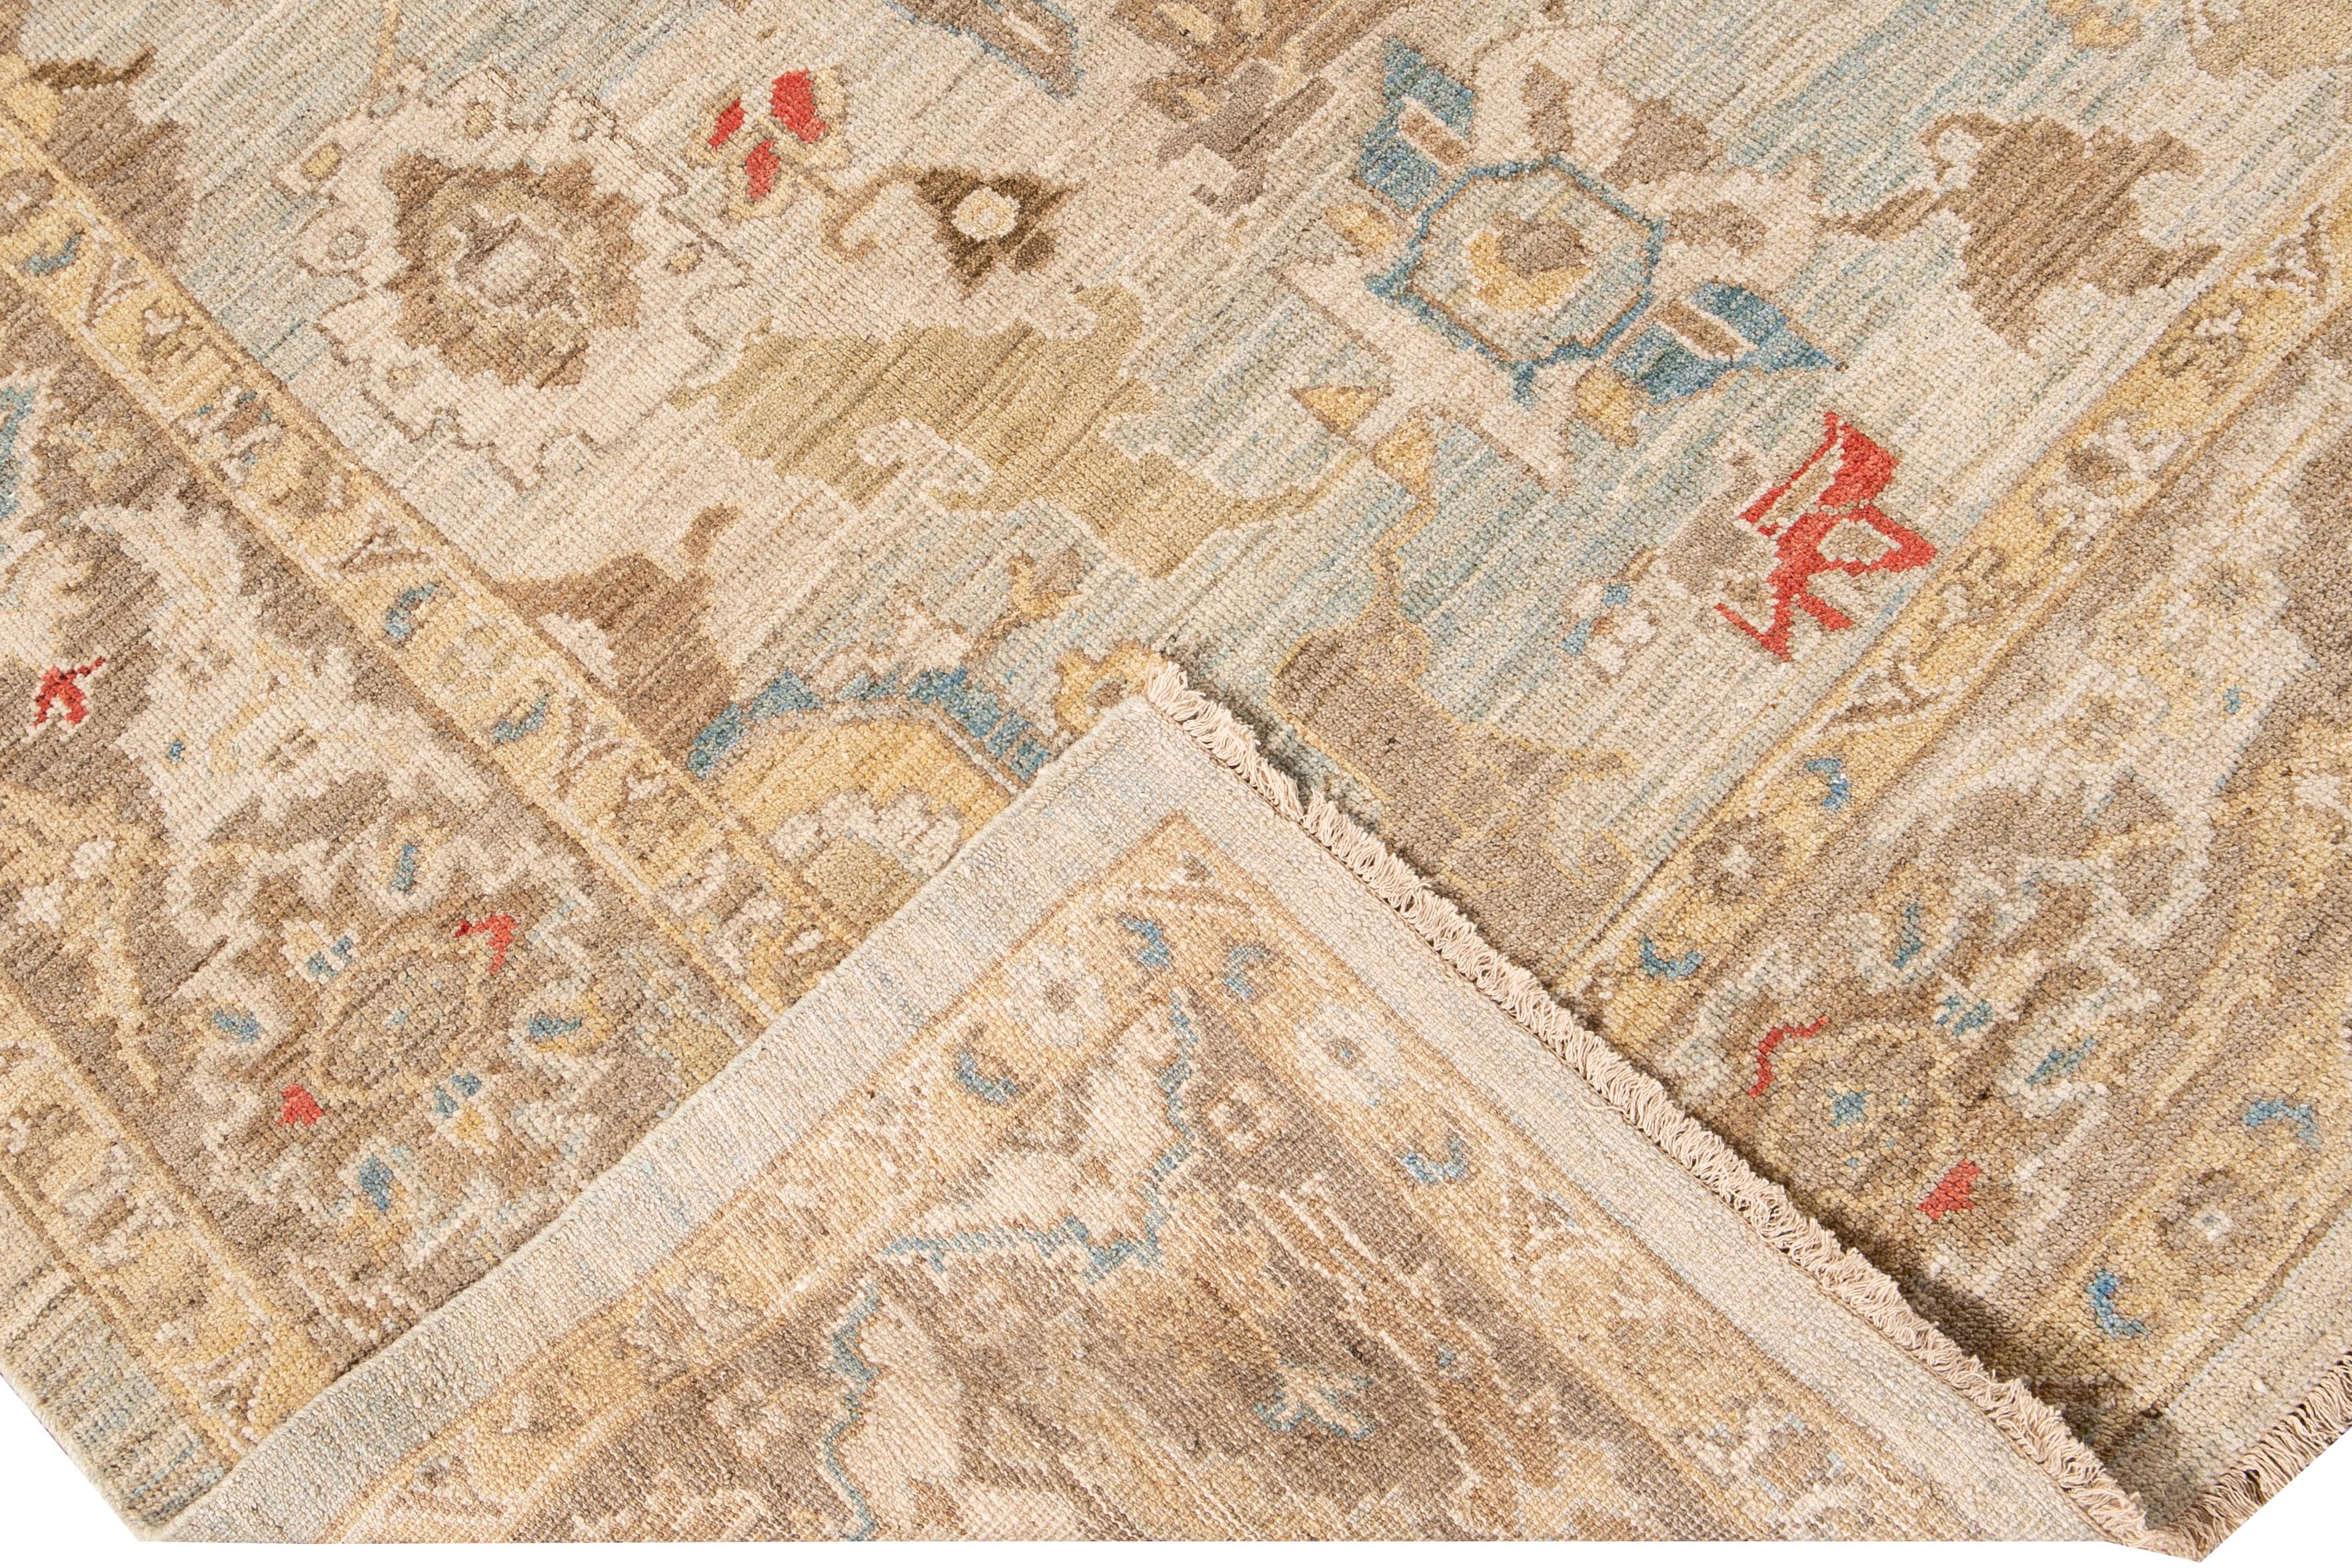 Beautiful modern Sultanabad hand-knotted wool rug with a blue field. This Sultanabad rug has a brown frame beige, yellow, brown, and orange accents in a gorgeous all-over classic geometric floral design.

This rug measures: 8'7